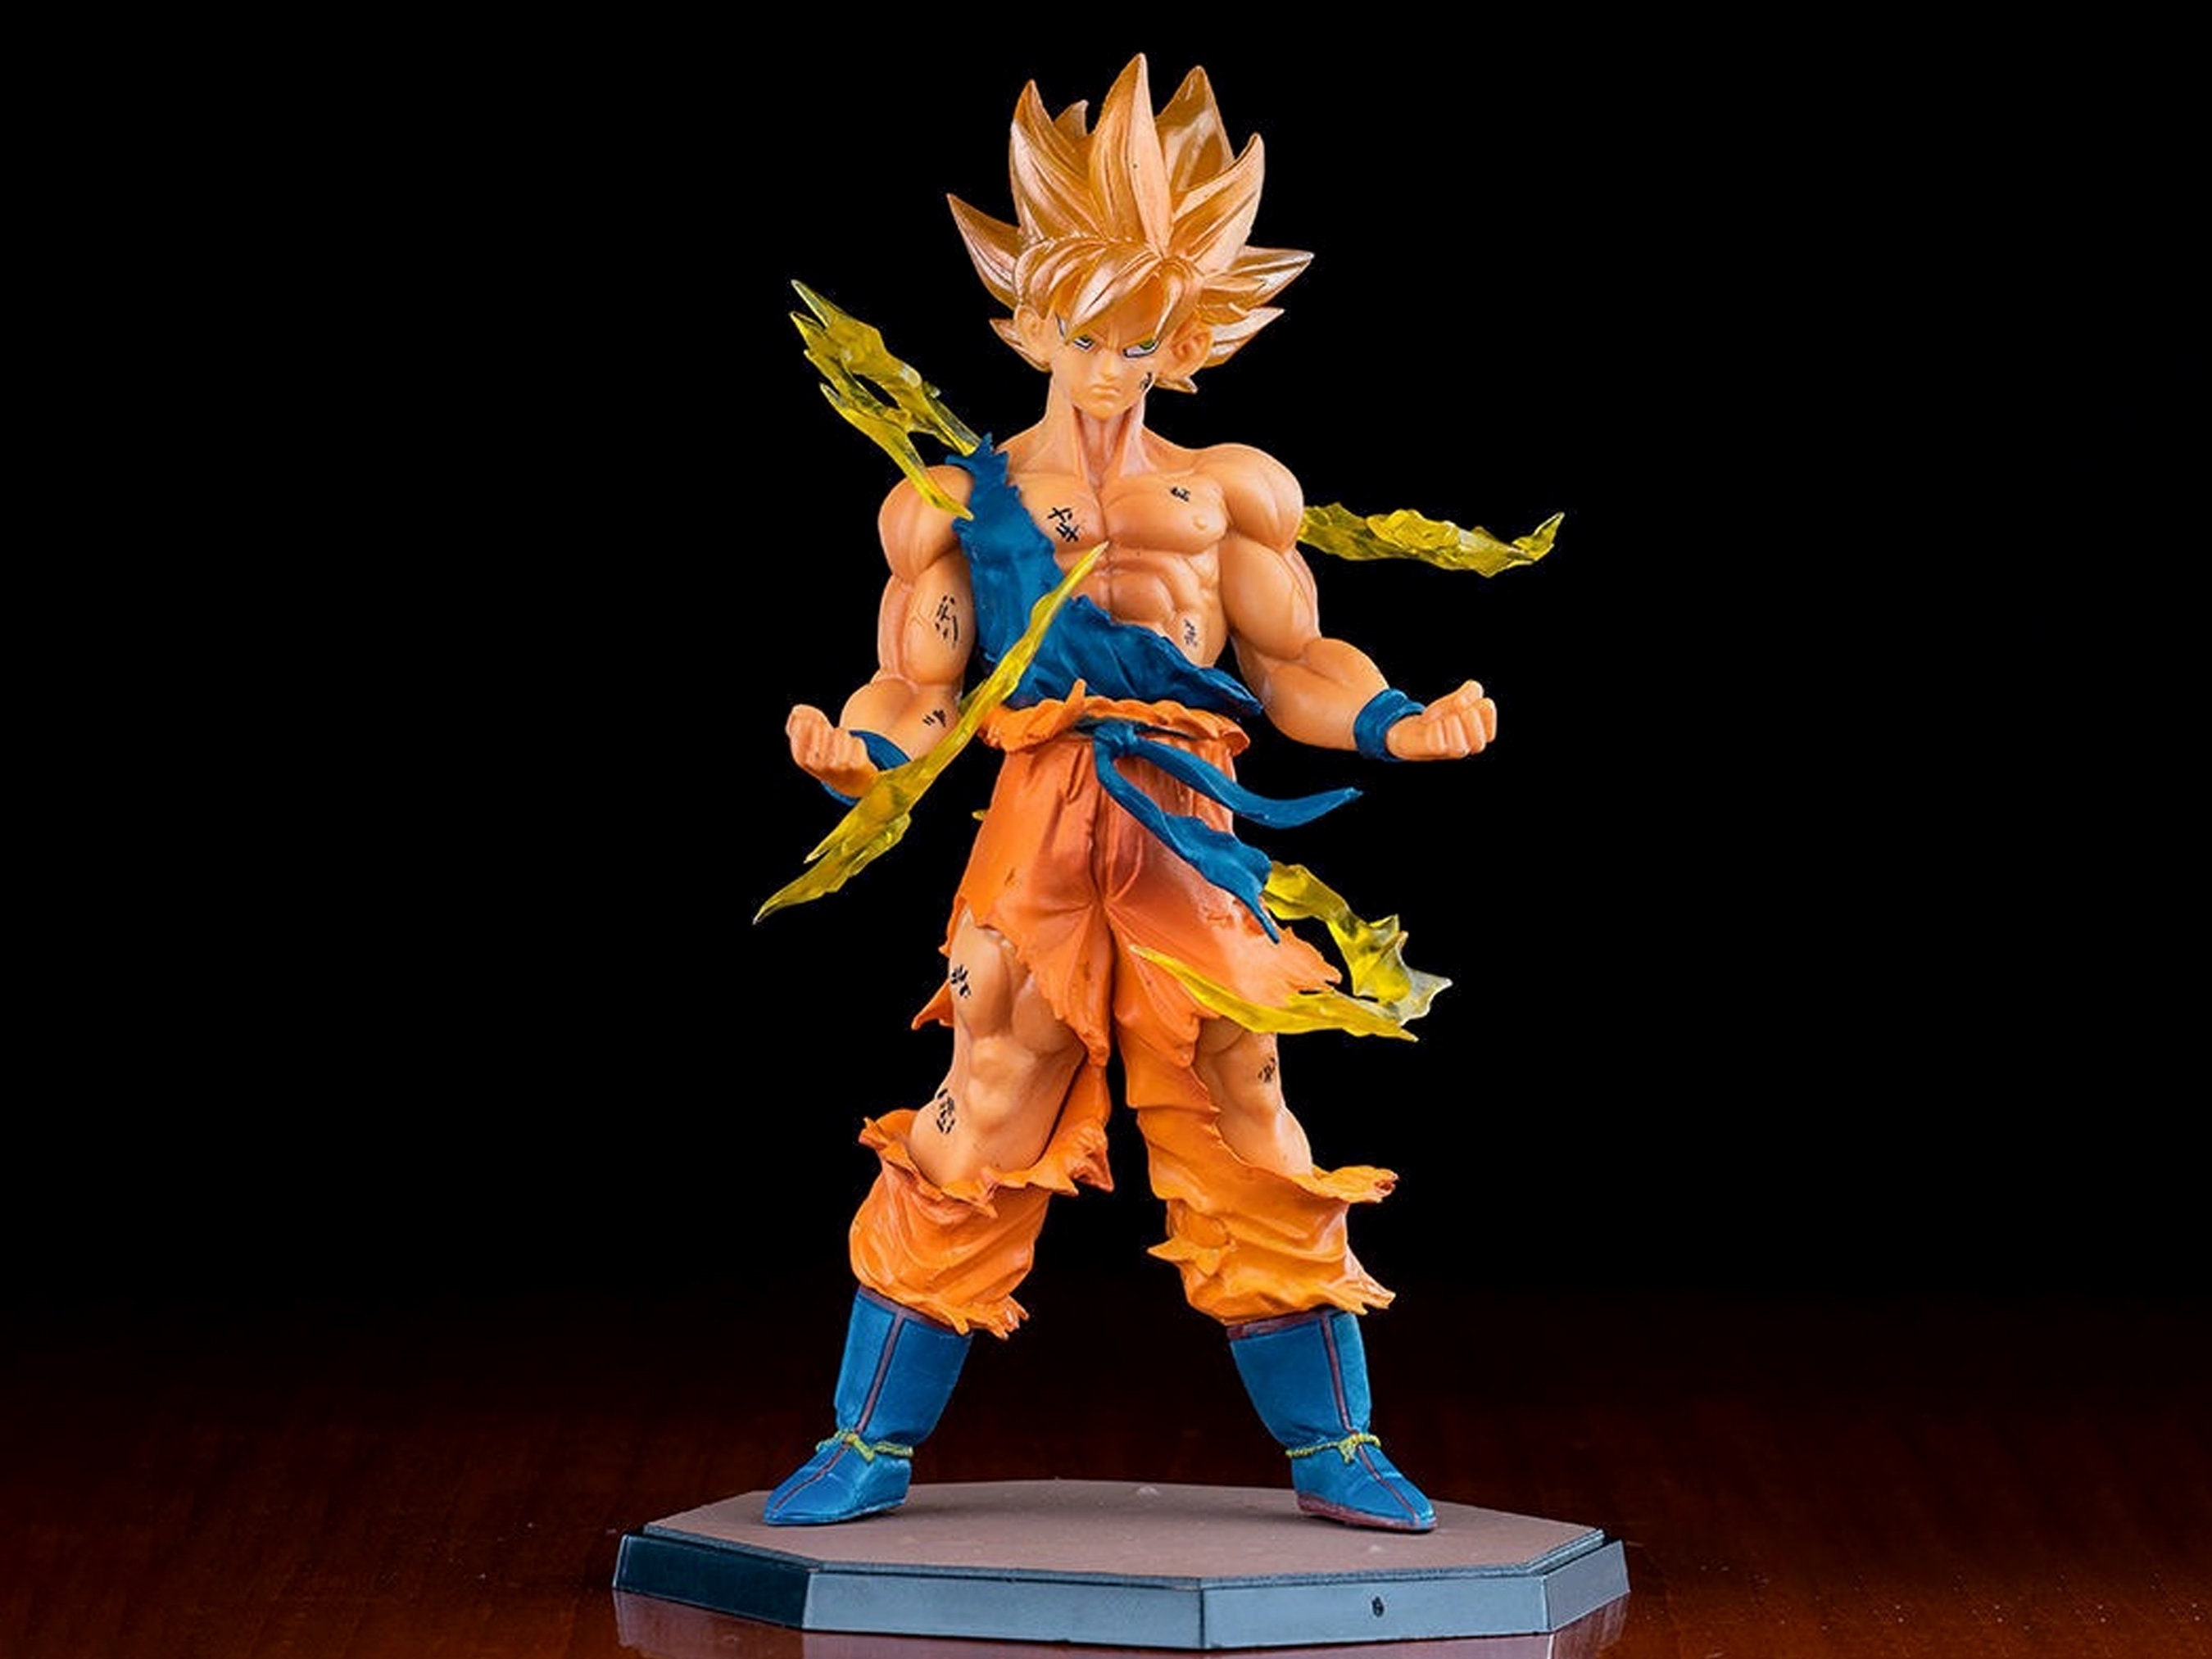 38cm Dragon Ball Z Action Figures Ls Son Goku Anime Collection Pvc Model  Statue Doll Toys For Children Large Figurines Gift